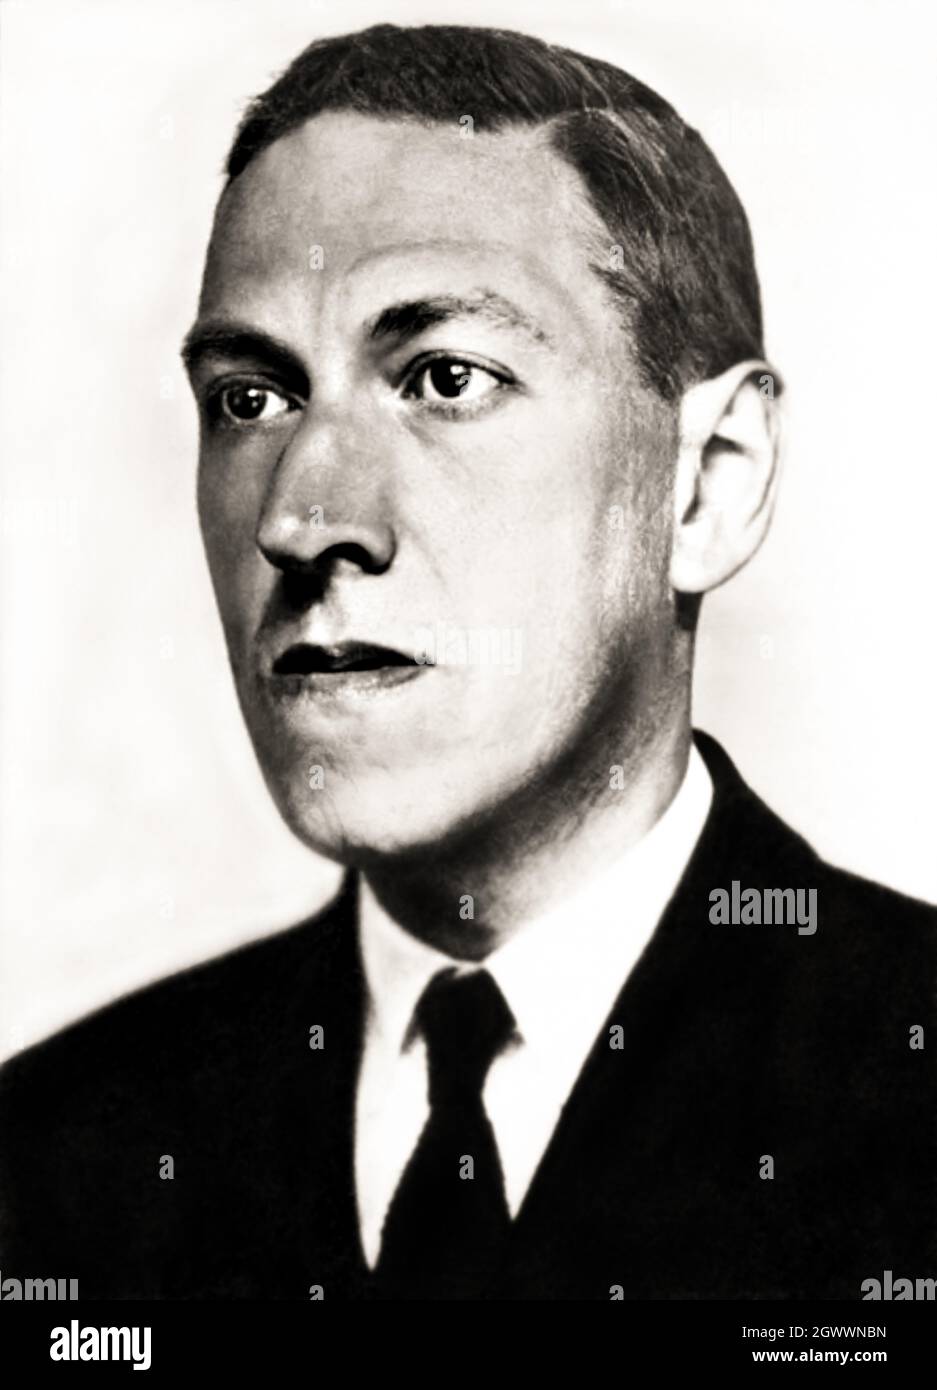 1934 , USA : The celebrated american Fantasy Science Fiction writer and poet H.P. LOVECRAFT ( Howard Phillips , 1890 - 1937 ) . Lovecraft is best known for his creation of a body of work that became known as the Cthulhu Mythos . Photo by Lucius B. Truesdell ( 1863 - 1934 ) .- HP - WRITER - FANTASCIENZA - SCRITTORE - LETTERATURA - LITERATURE - letterato - POETA - POESIA - POETRY - HIGH FANTASY - HISTORY - FOTO STORICHE - PORTRAIT - RITRATTO - PSICHEDELIA - PSYCHEDELIC - cravatta - tie - collar - colletto --- Archivio GBB Stock Photo